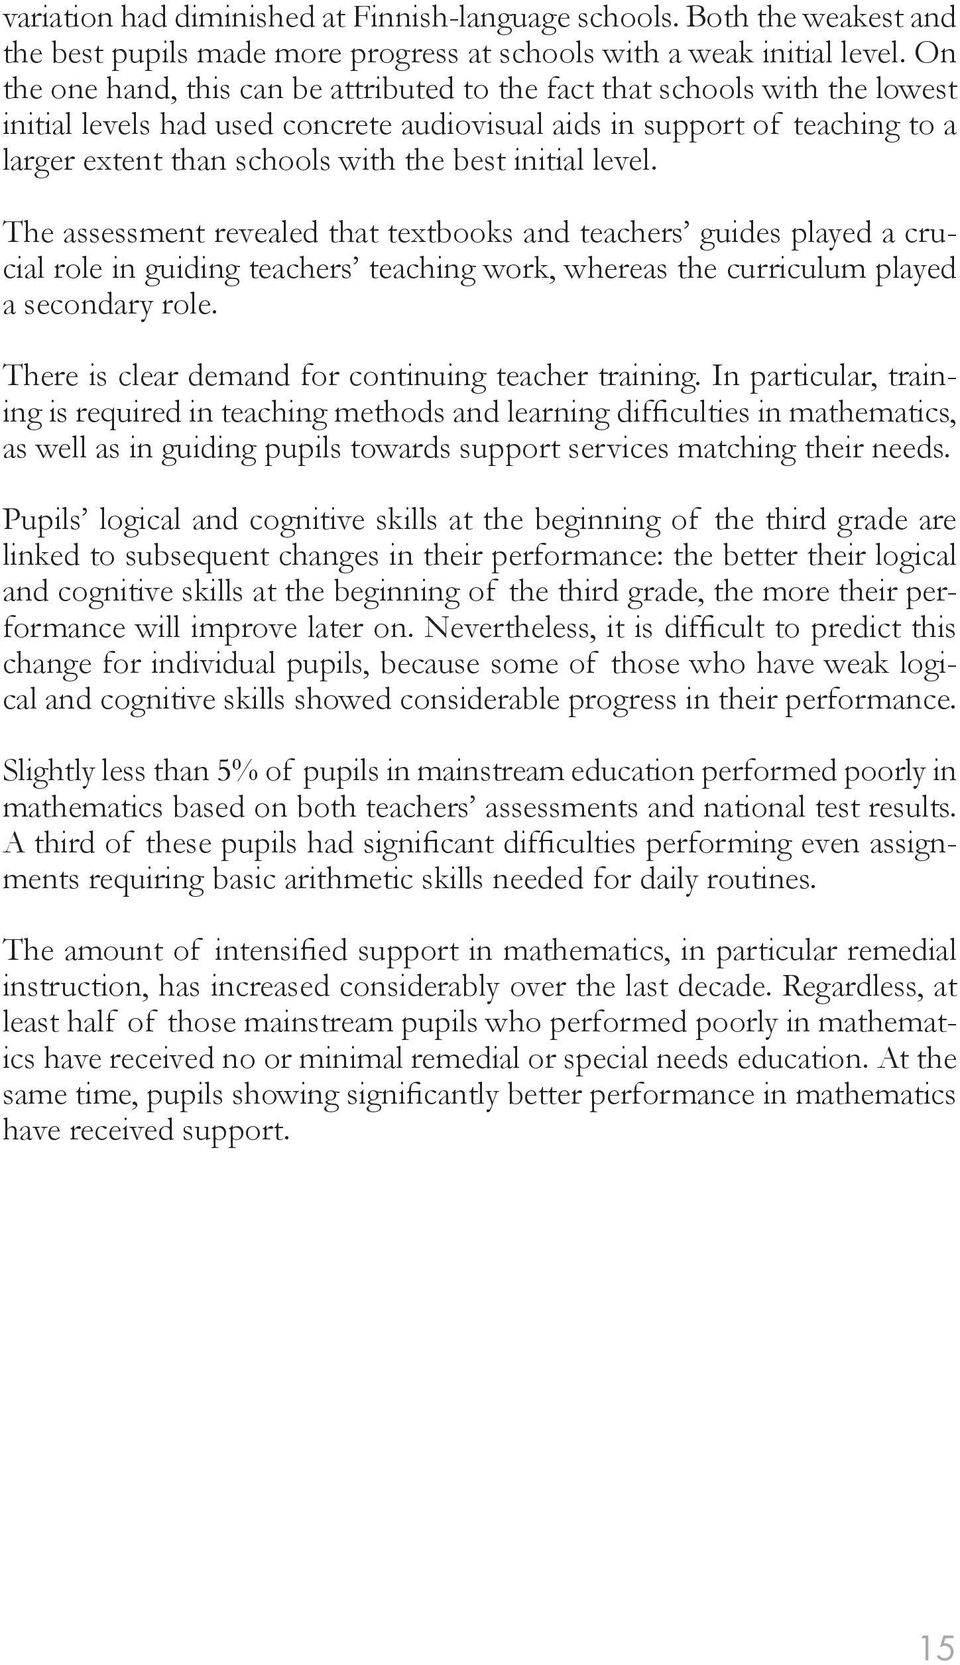 initial level. The assessment revealed that textbooks and teachers guides played a crucial role in guiding teachers teaching work, whereas the curriculum played a secondary role.